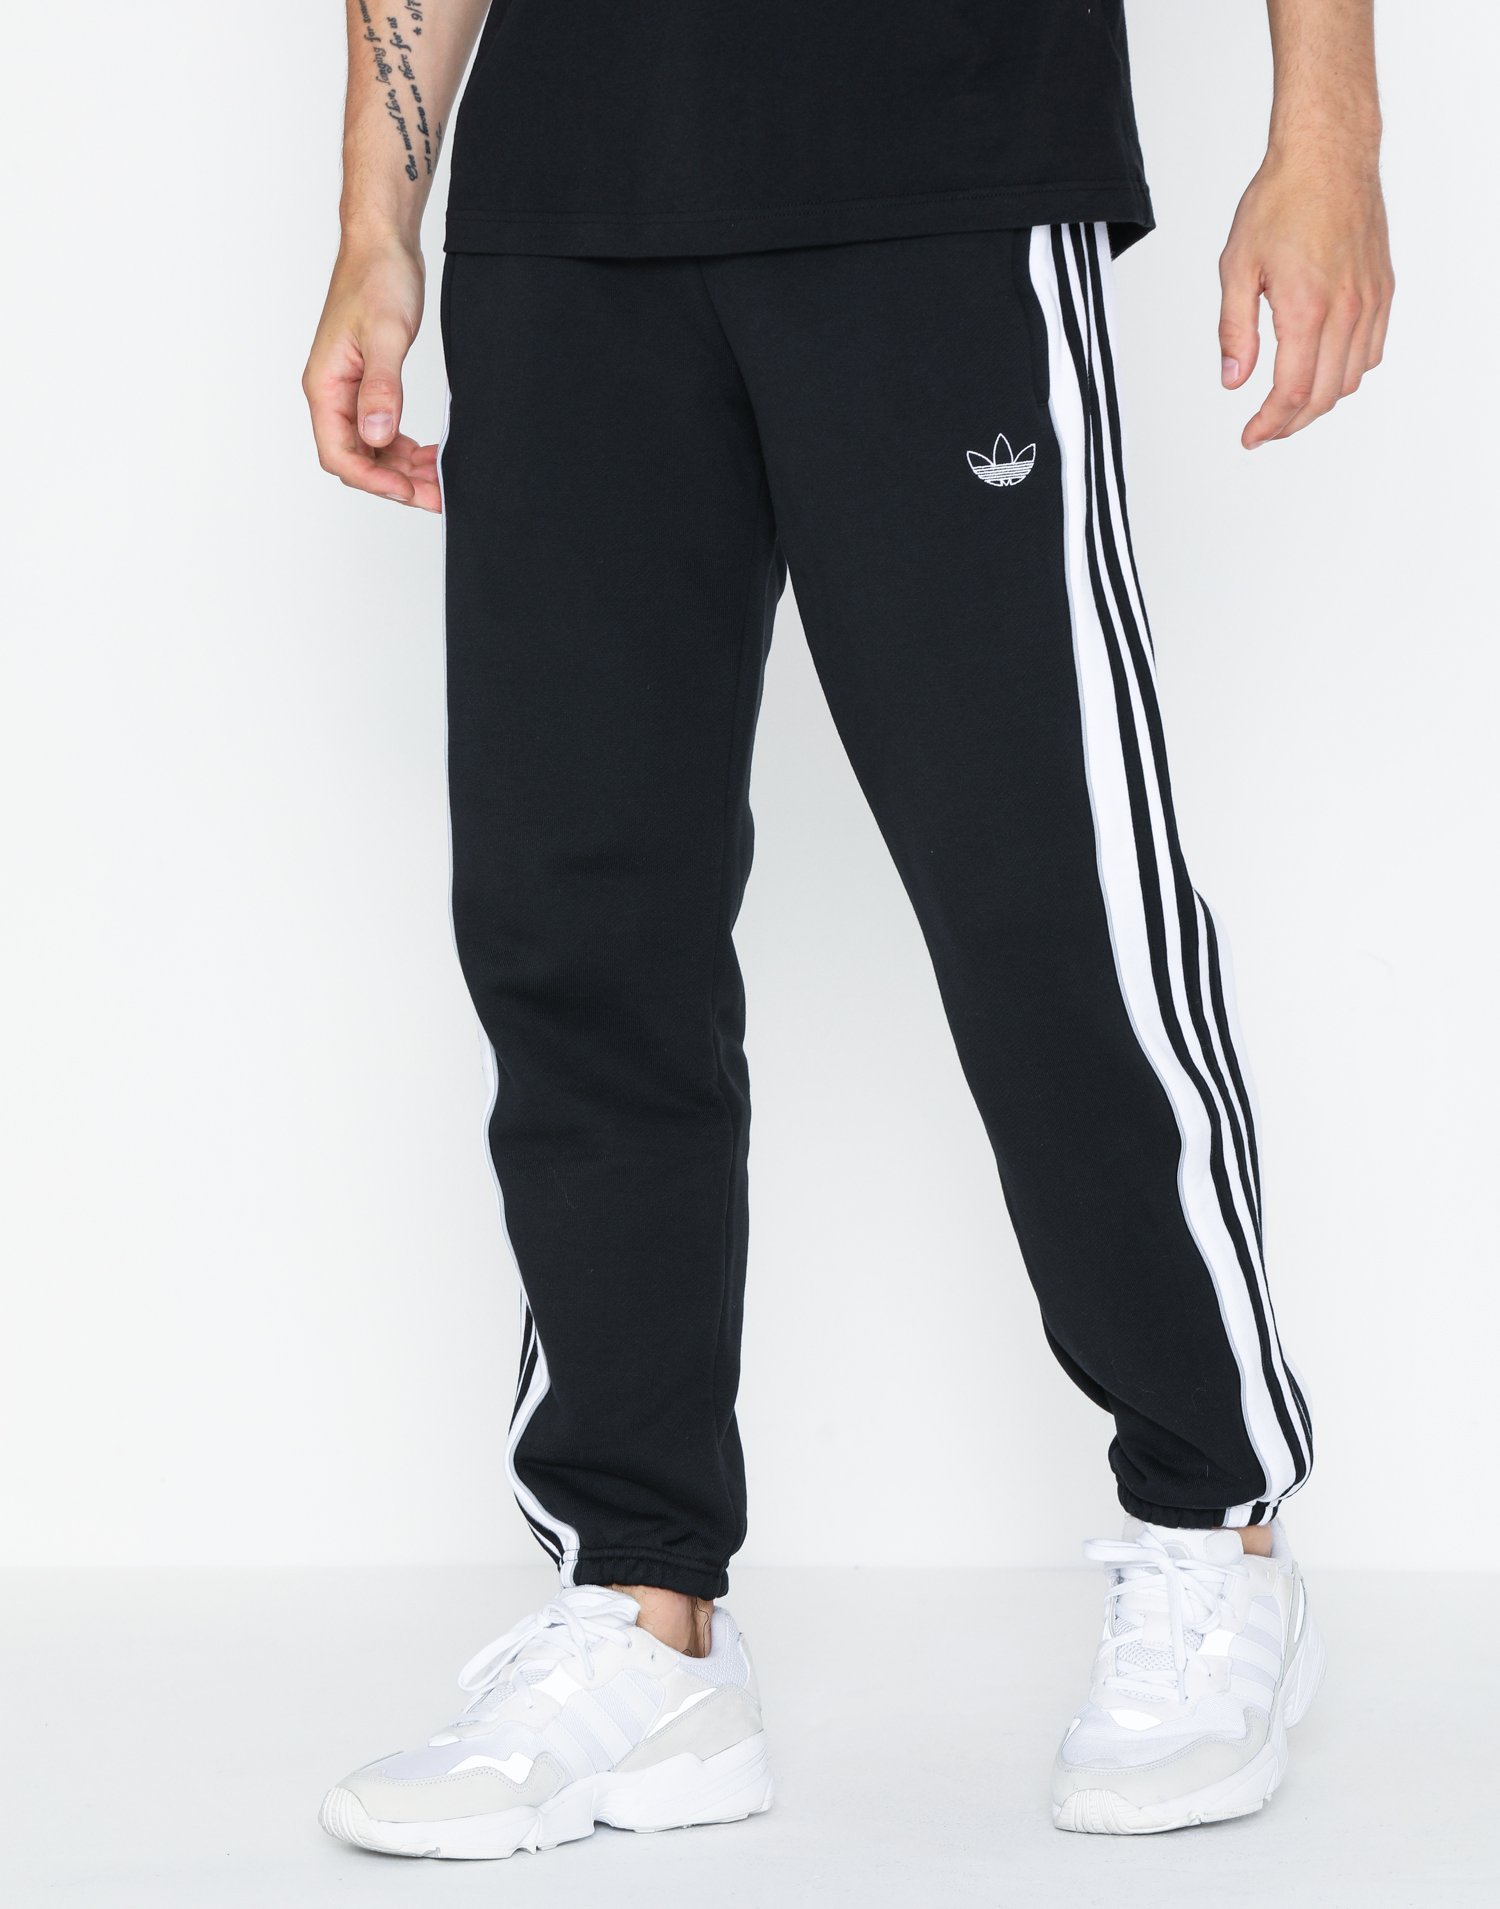 the brand with the 3 stripes pants